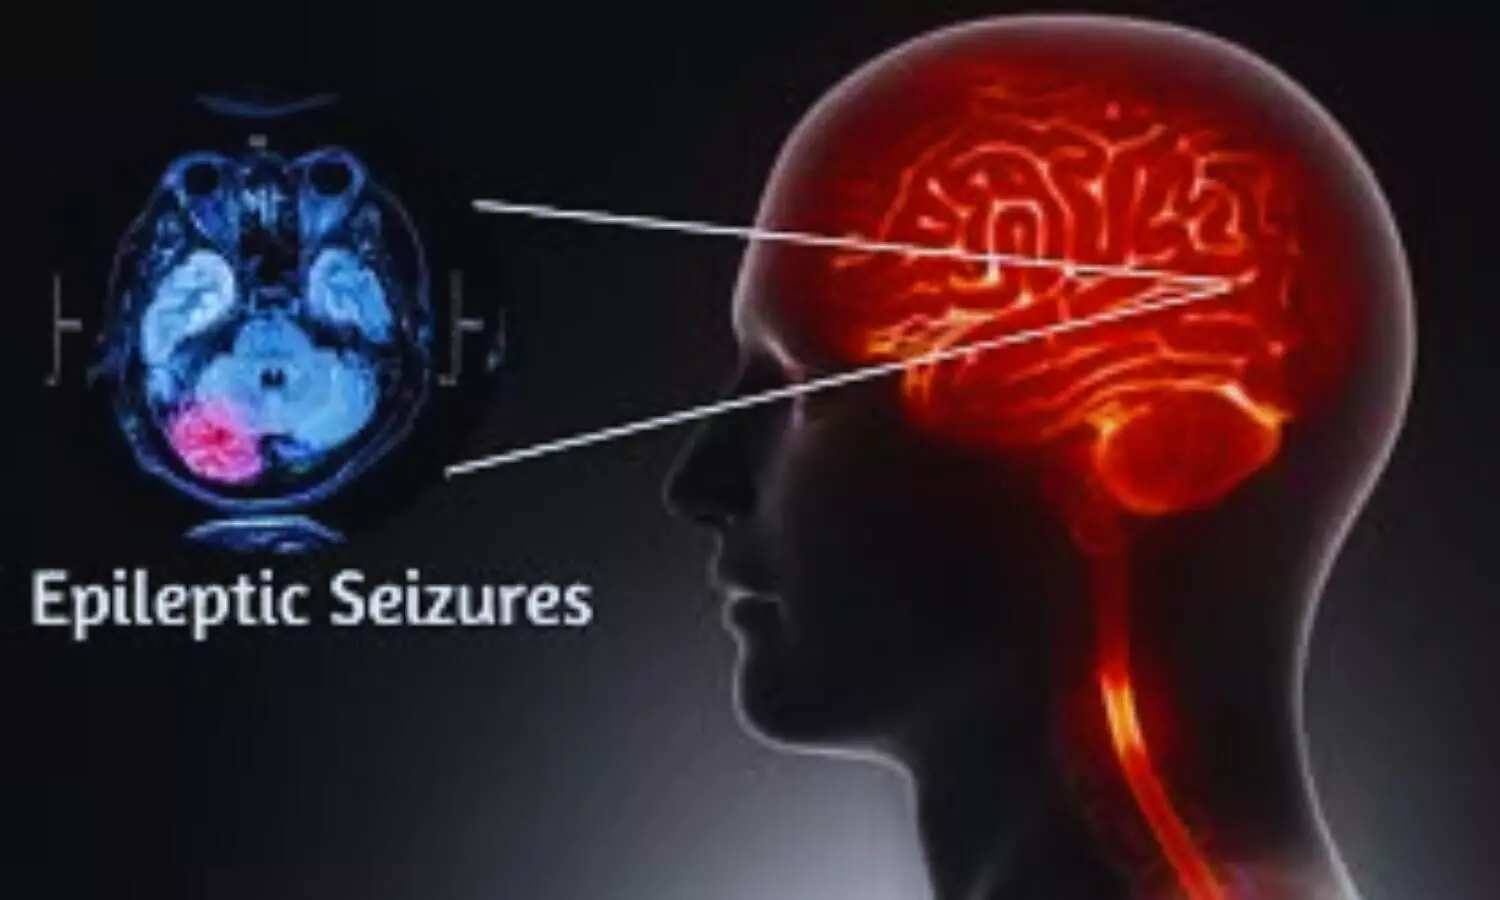 Treatments for patients with refractory Epilepsy: Guideline update